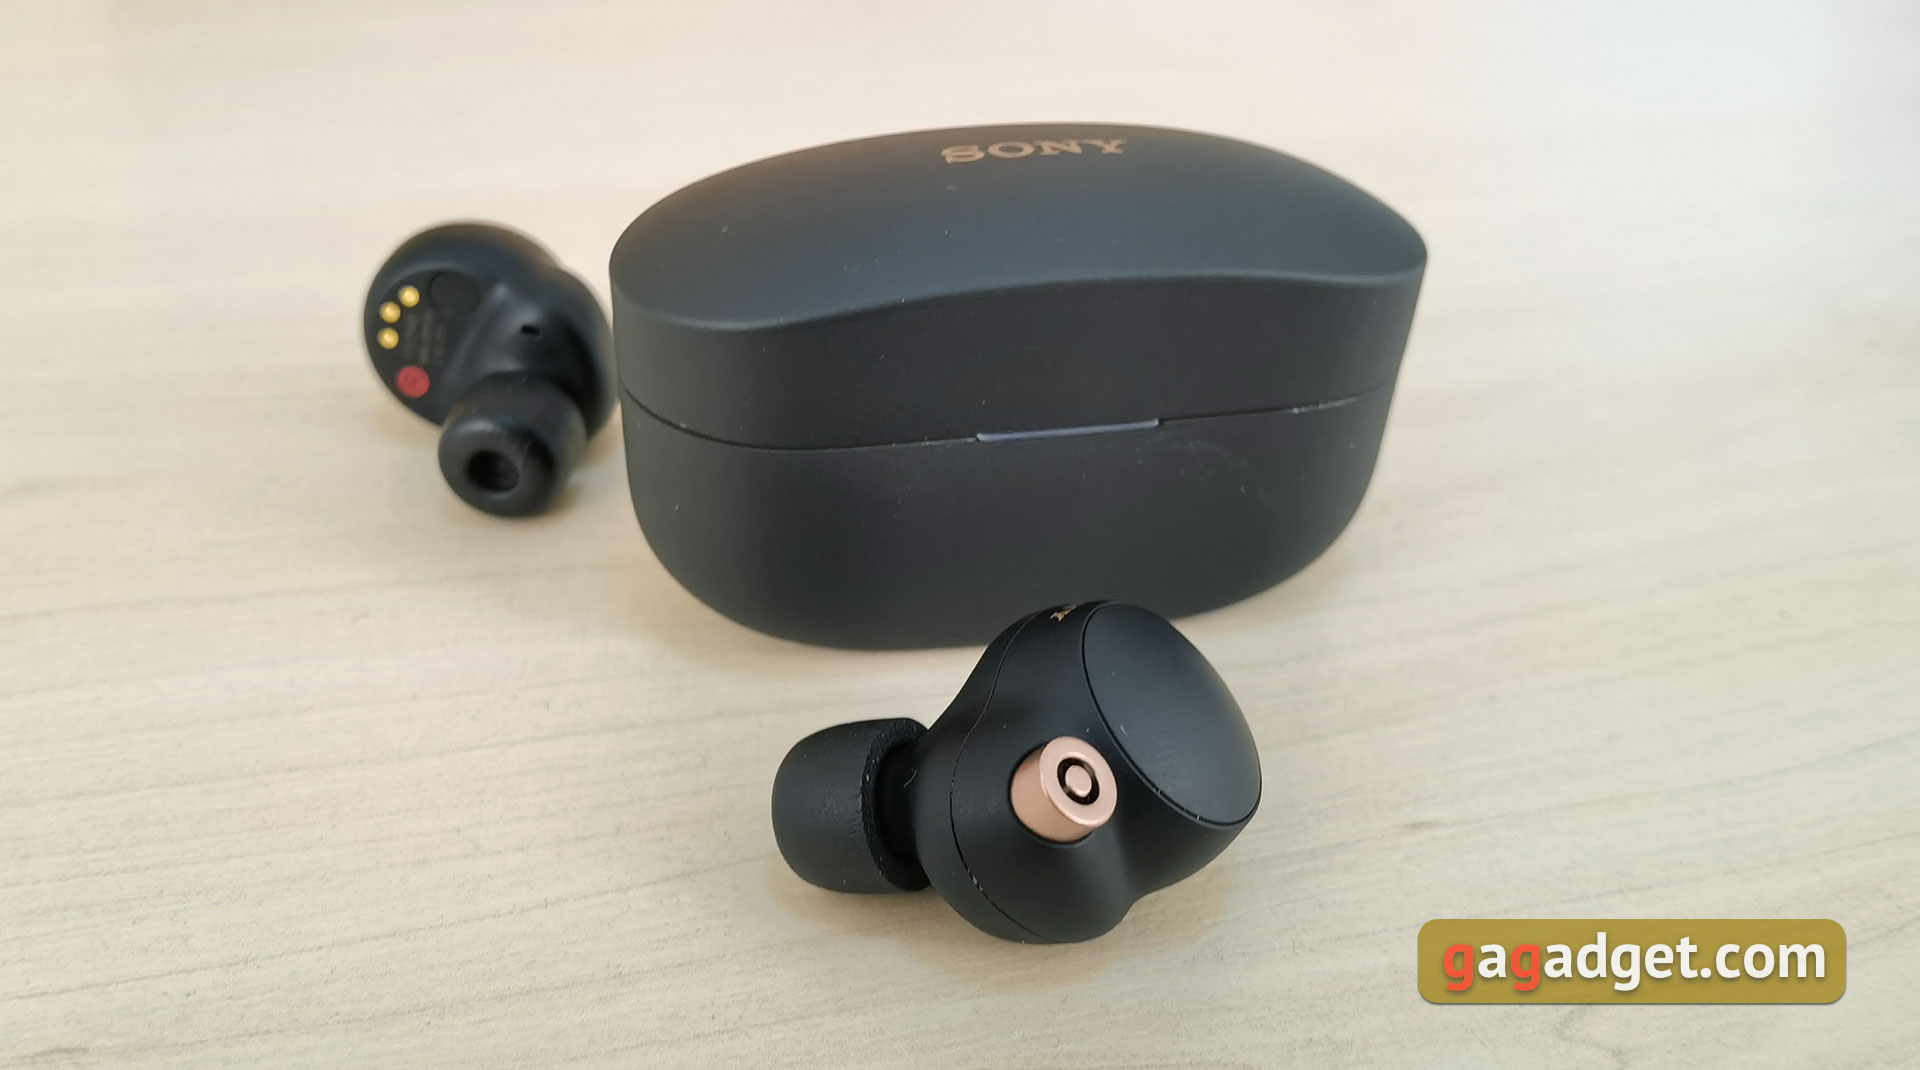 Sony WF-1000XM4 Review: TWS Flagship Earbuds with Best Noise Cancellation-52